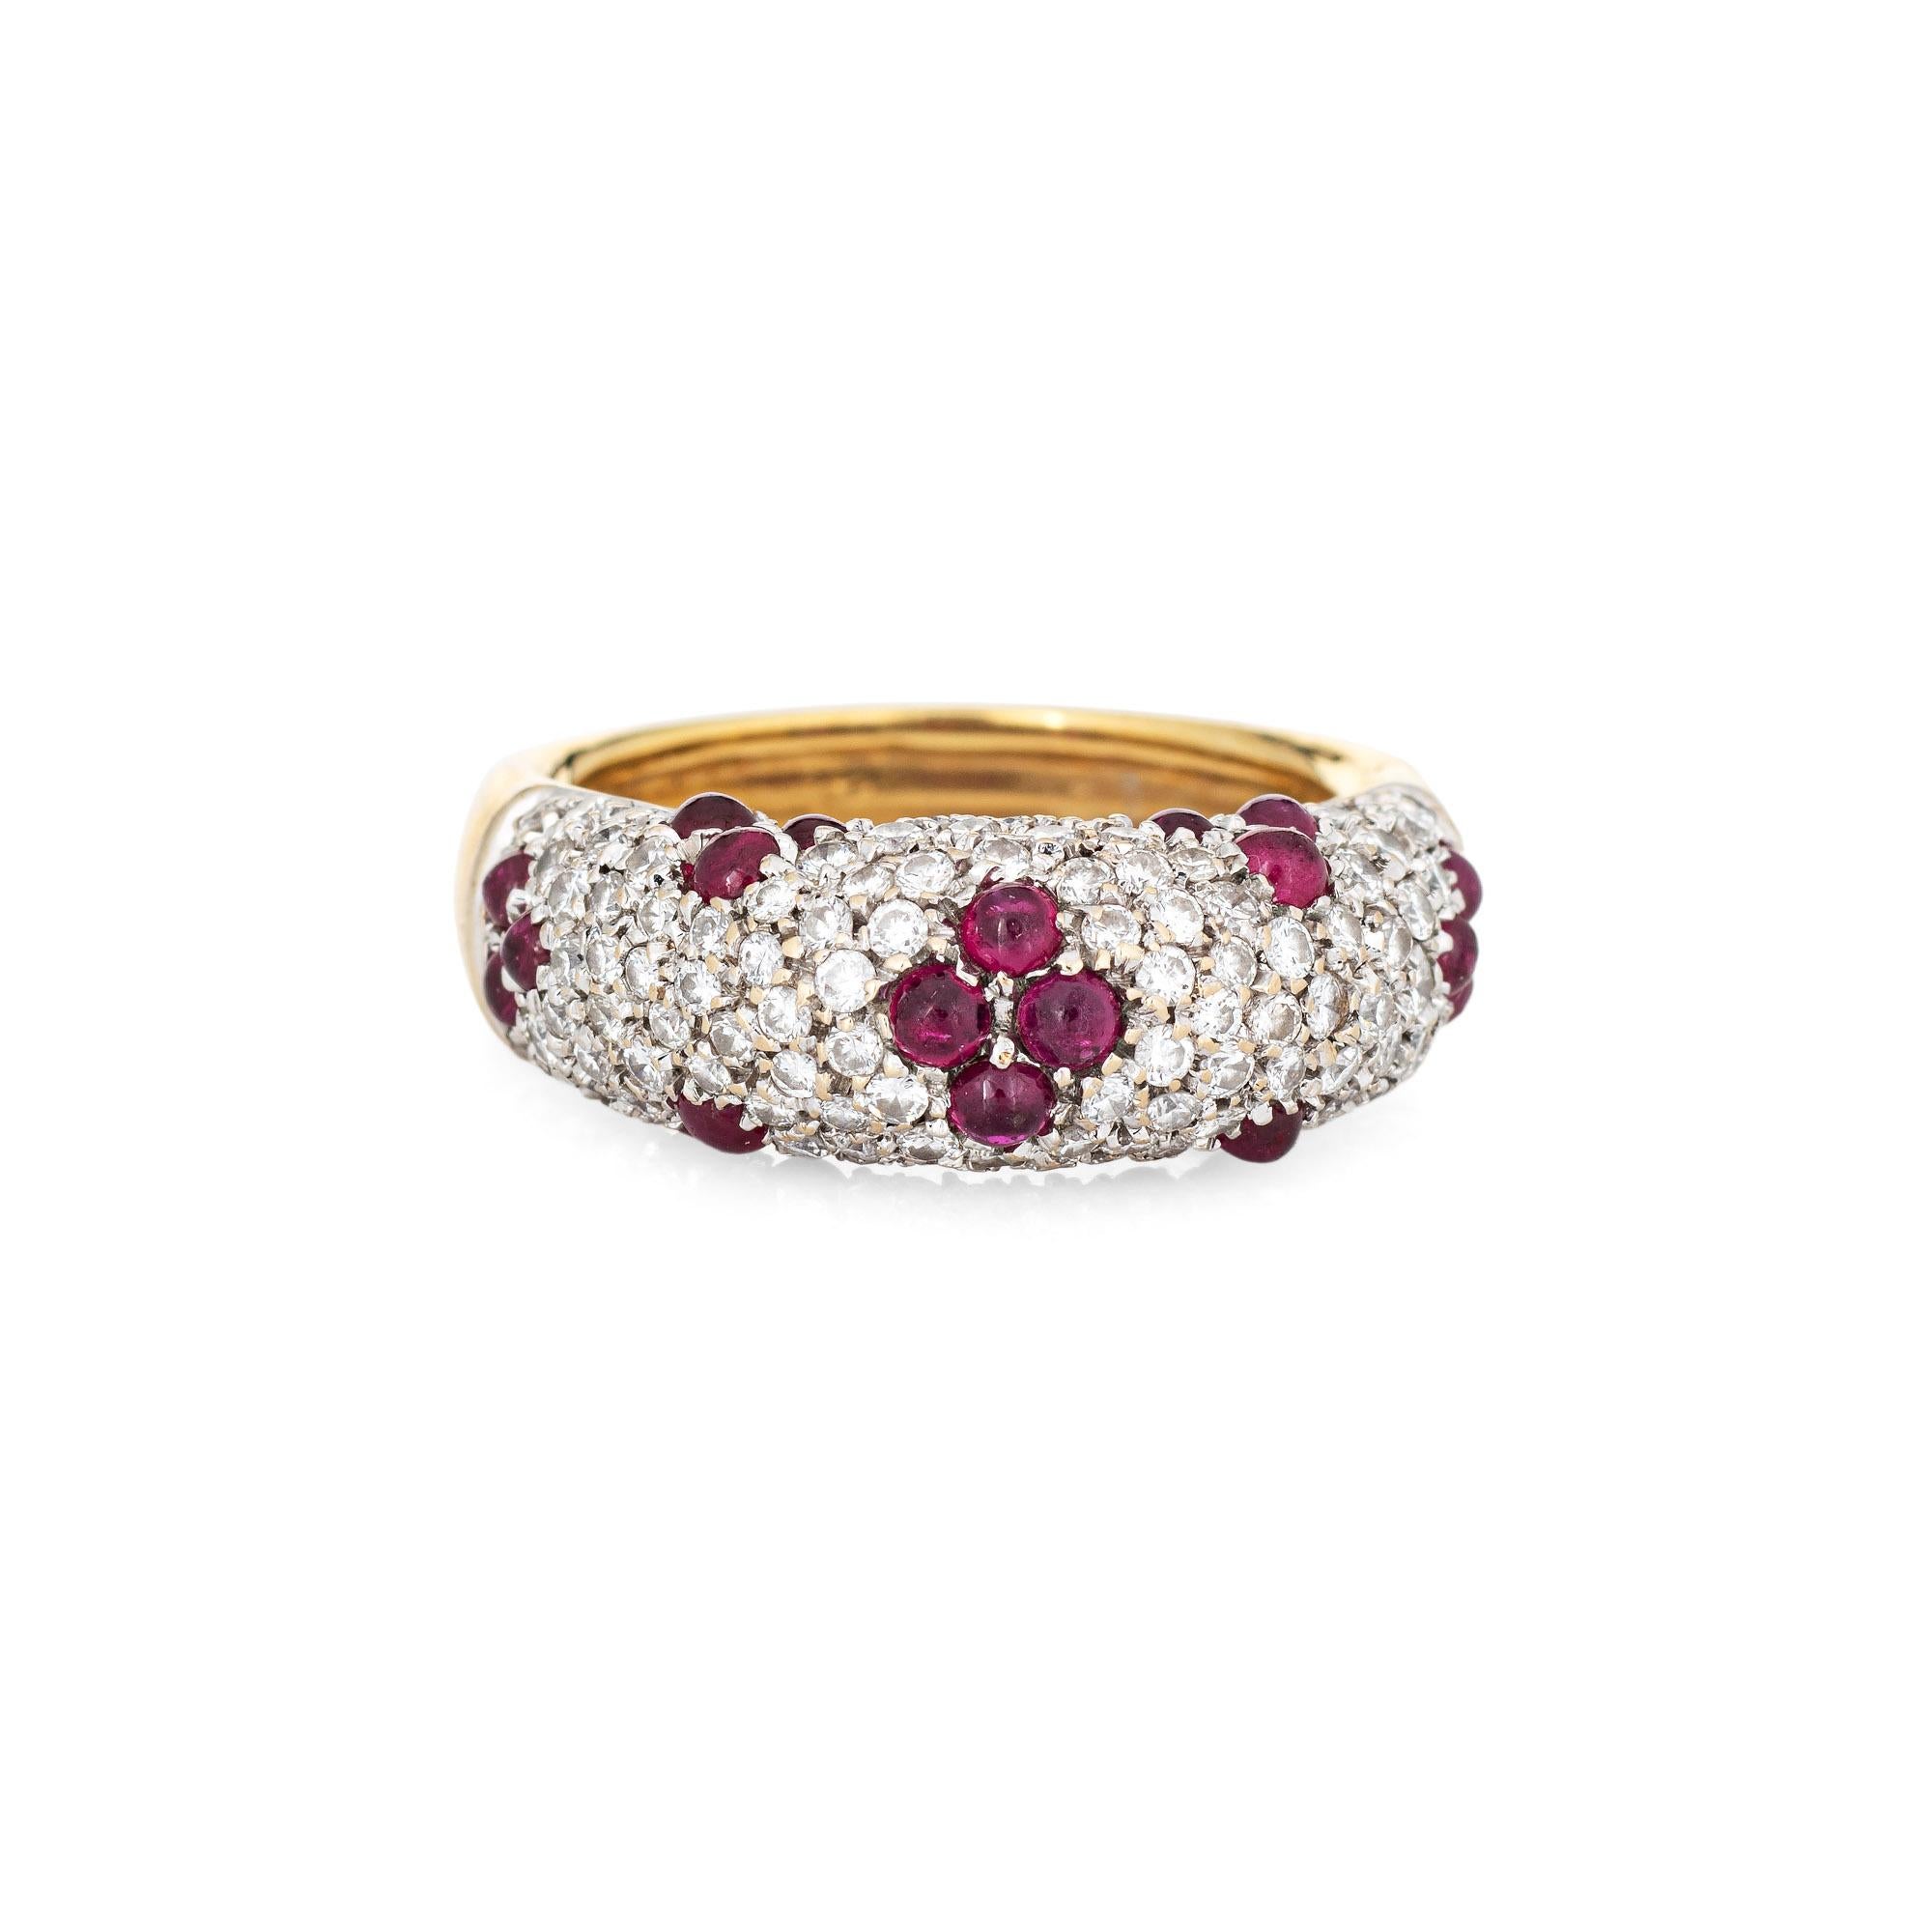 Stylish vintage pave diamond and cabochon ruby ring (circa 1970s to 1980s) crafted in 14 karat yellow gold. 

Round brilliant cut diamonds total an estimated 1 carat (estimated at I-J color and VS2-SI2 clarity). The cabochon rubies measure from